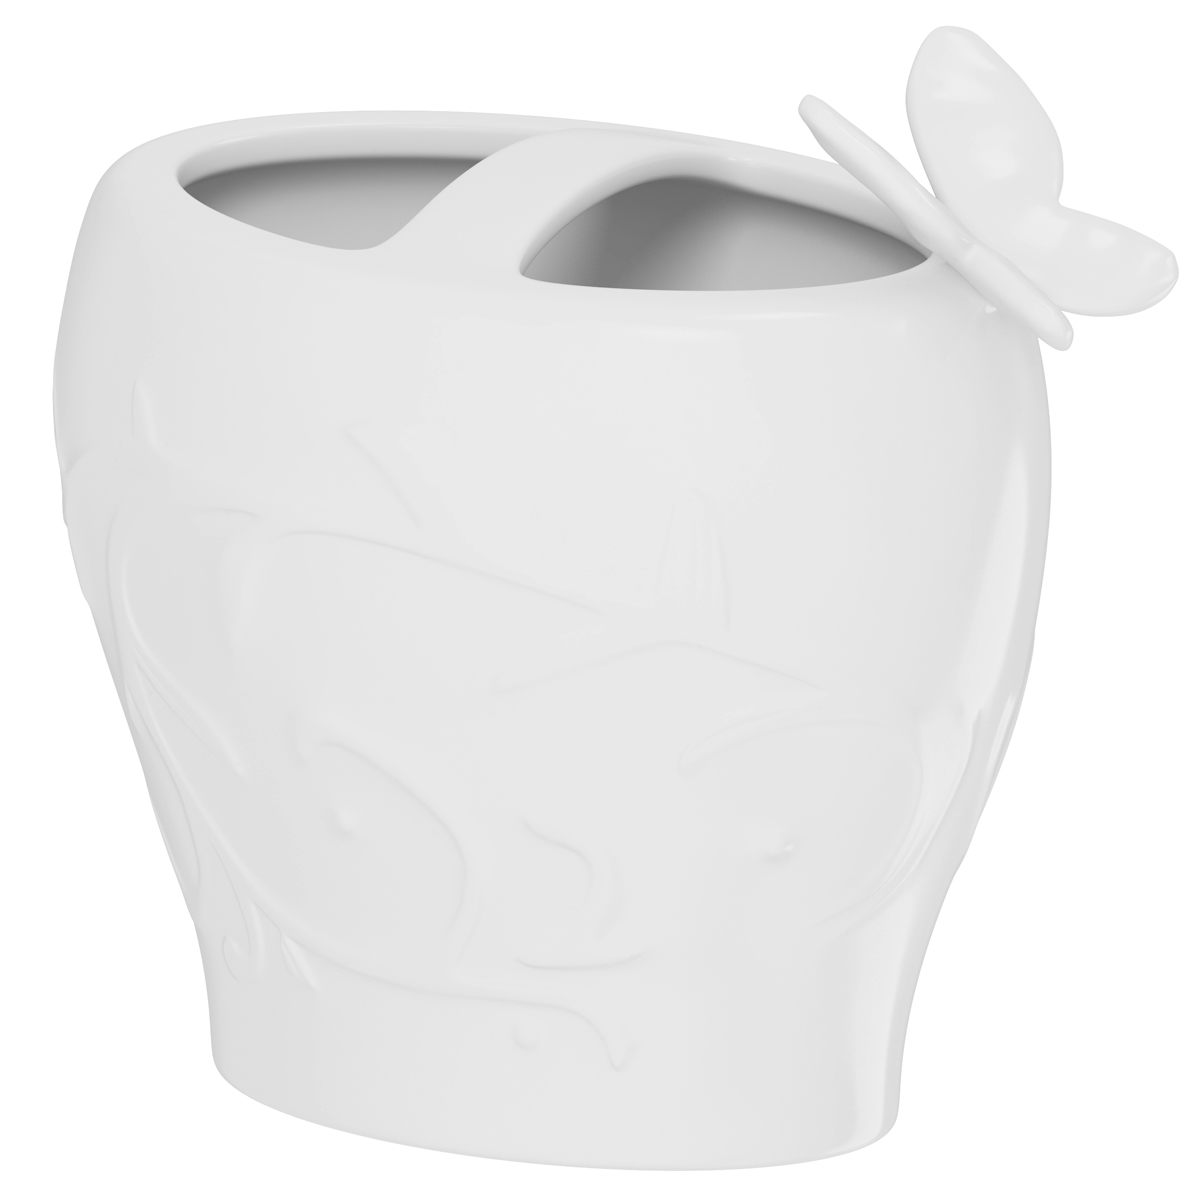 Accents Edelle porcelain white butterfly toothbrush holder